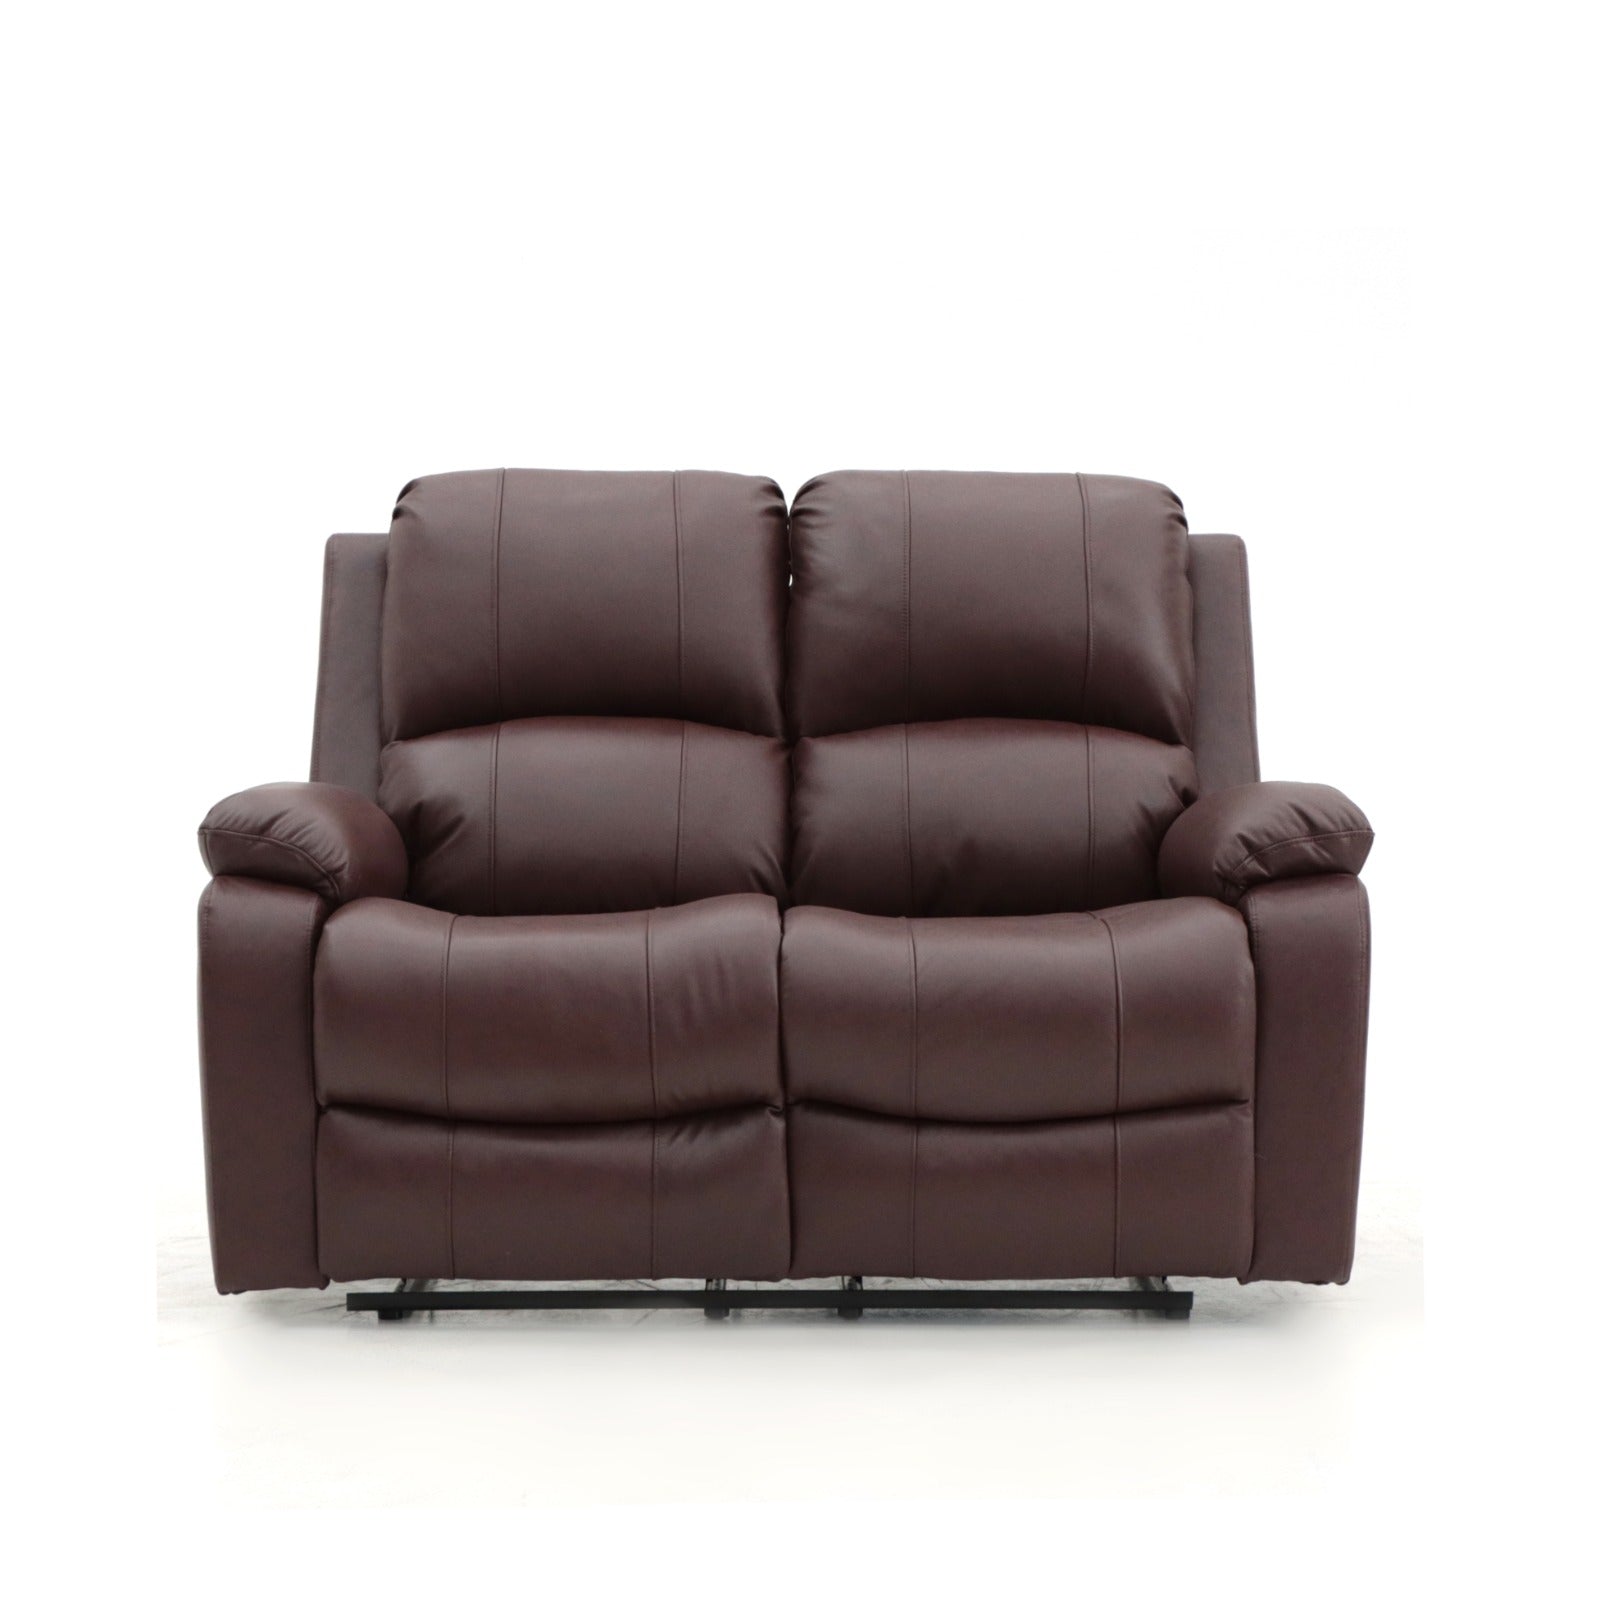 Aston 2 Seater Manual Recliner Chesnut Leather